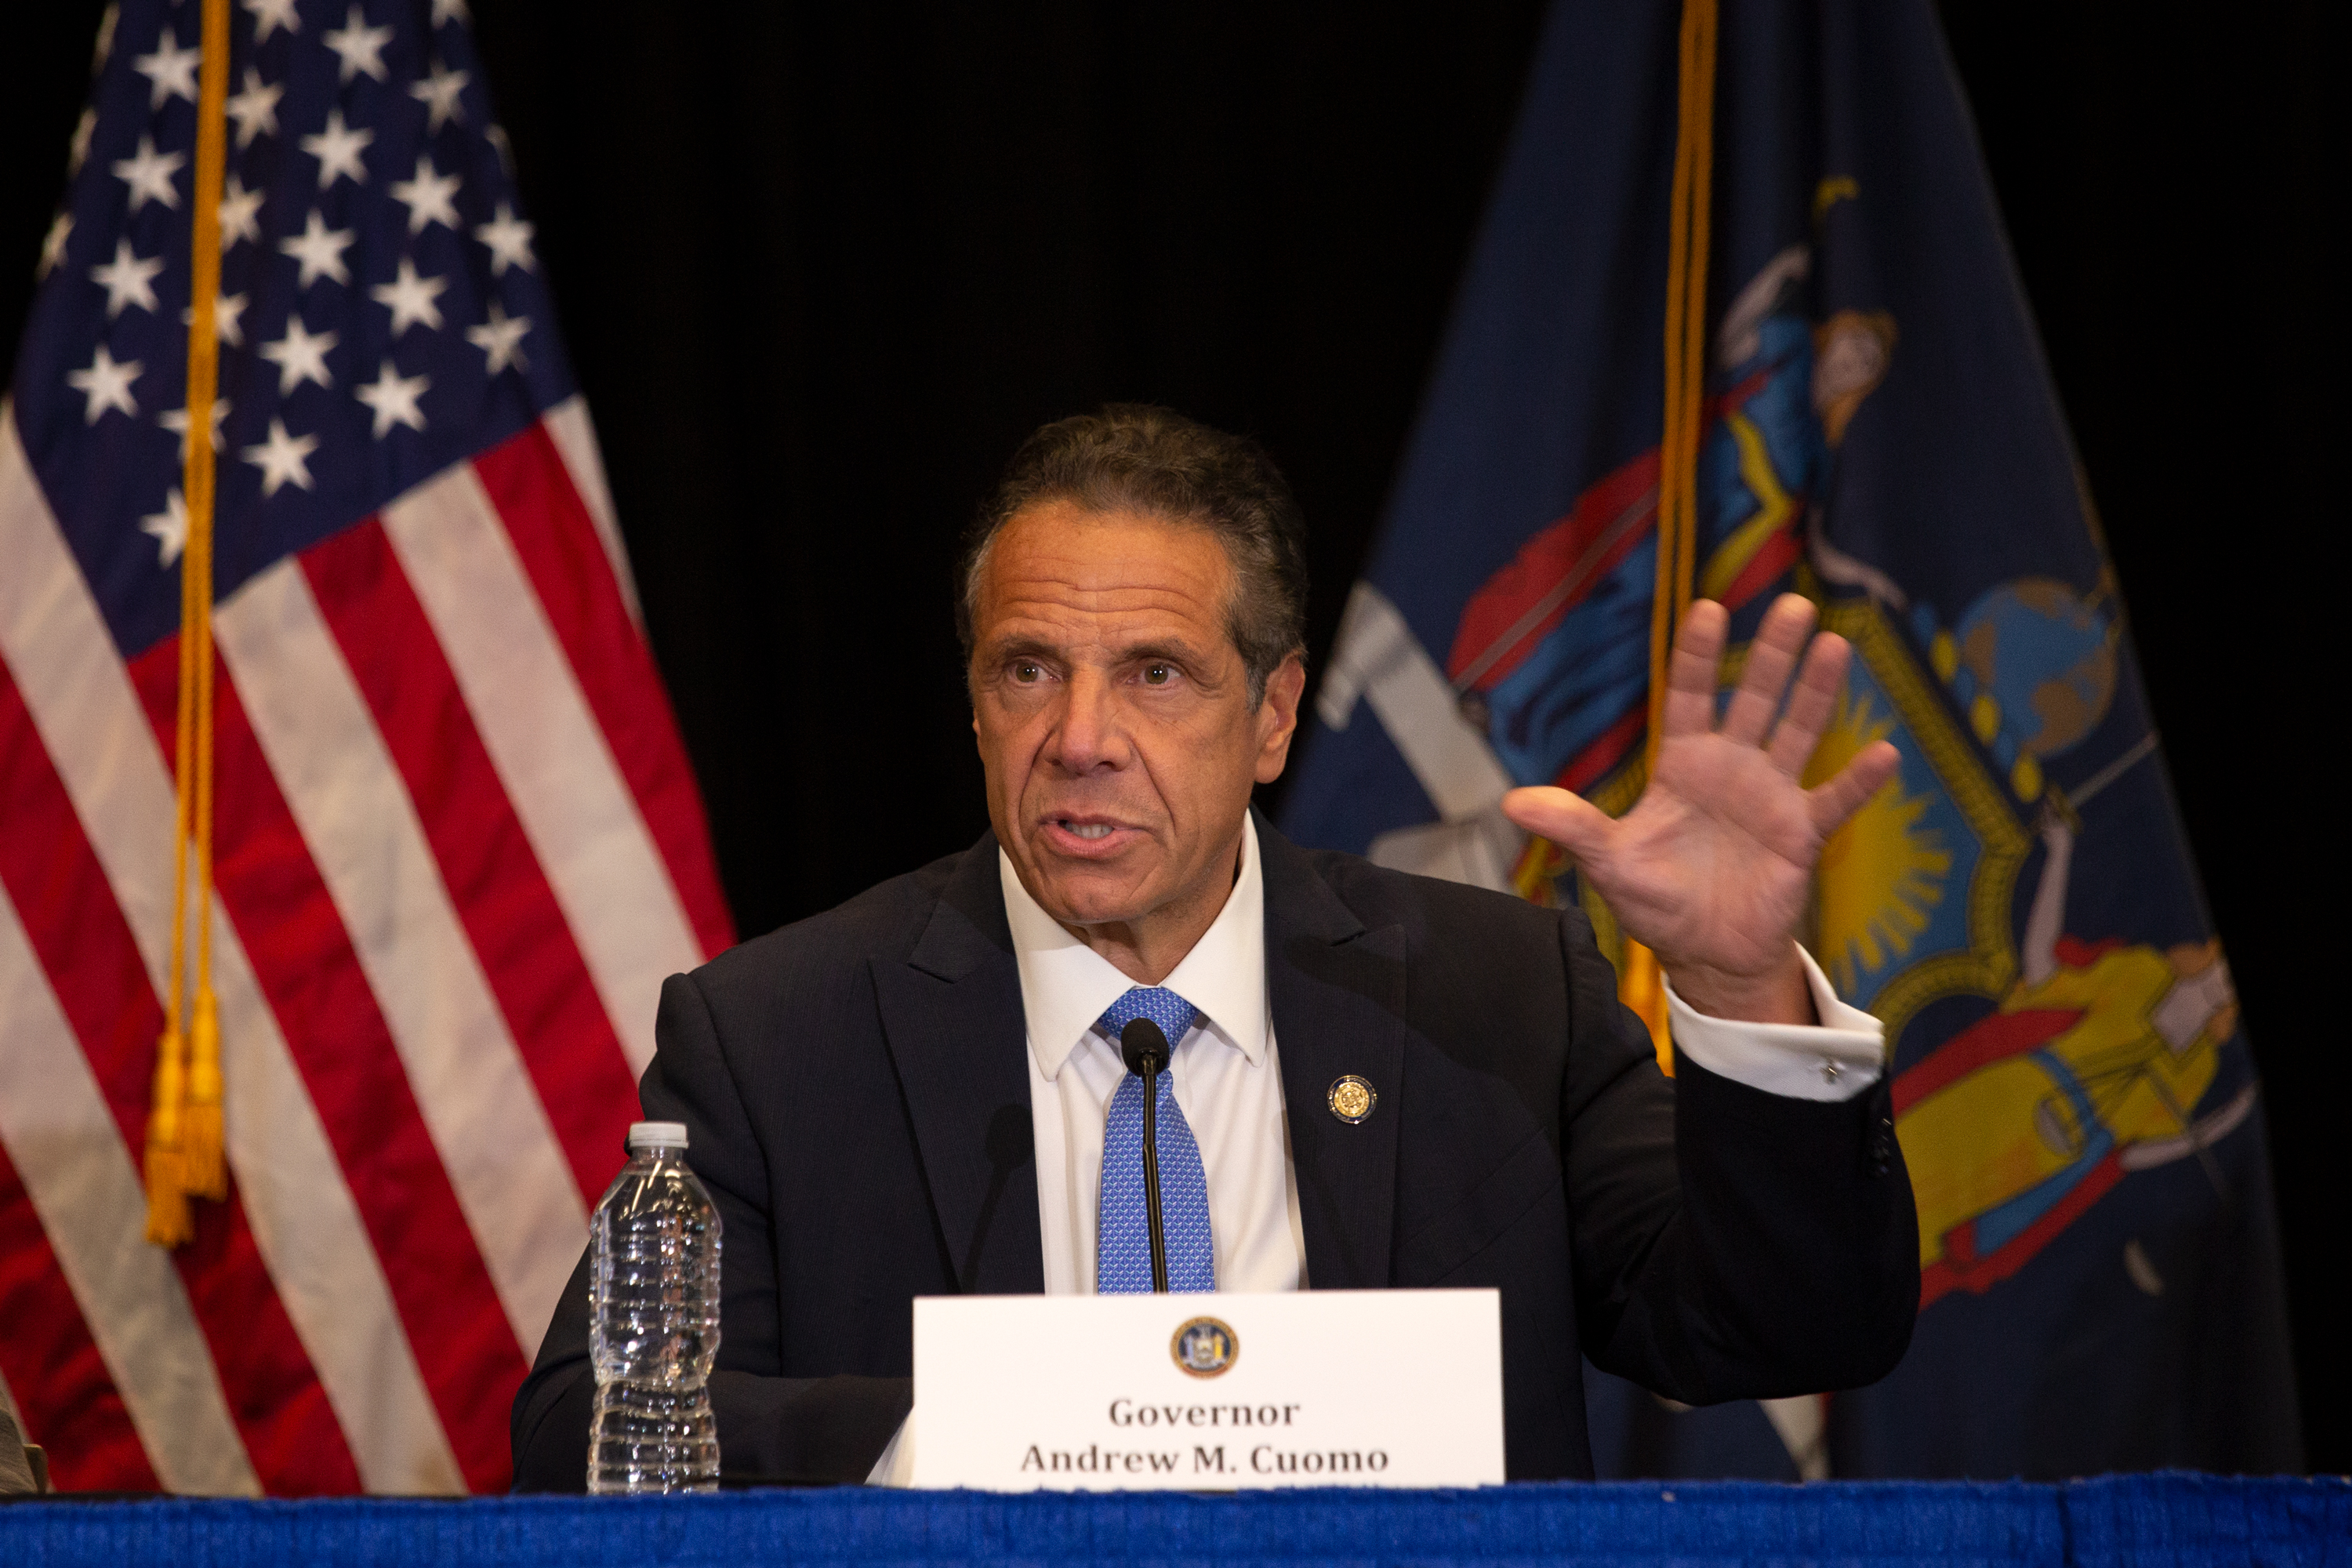 Gov. Andrew Cuomo speaks about the need to increase vaccination rates during a press conference at Yankee Stadium on Monday, July 26, 2021.